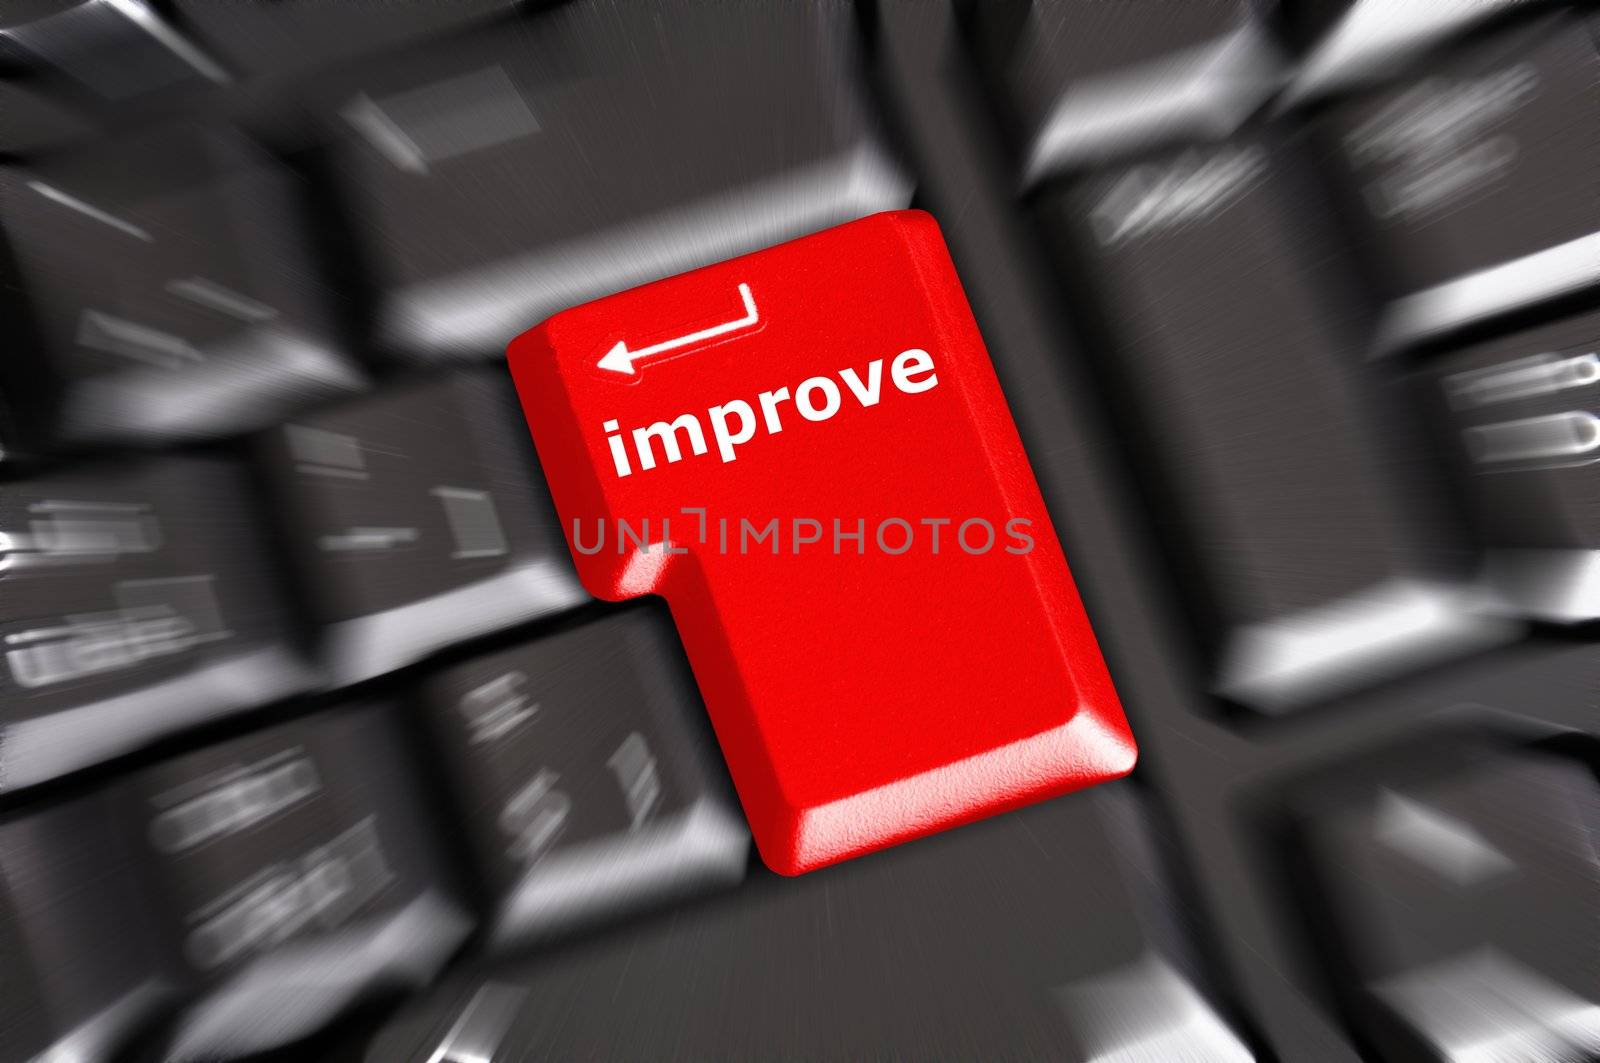 improve or improvement business concept with key on keyboard